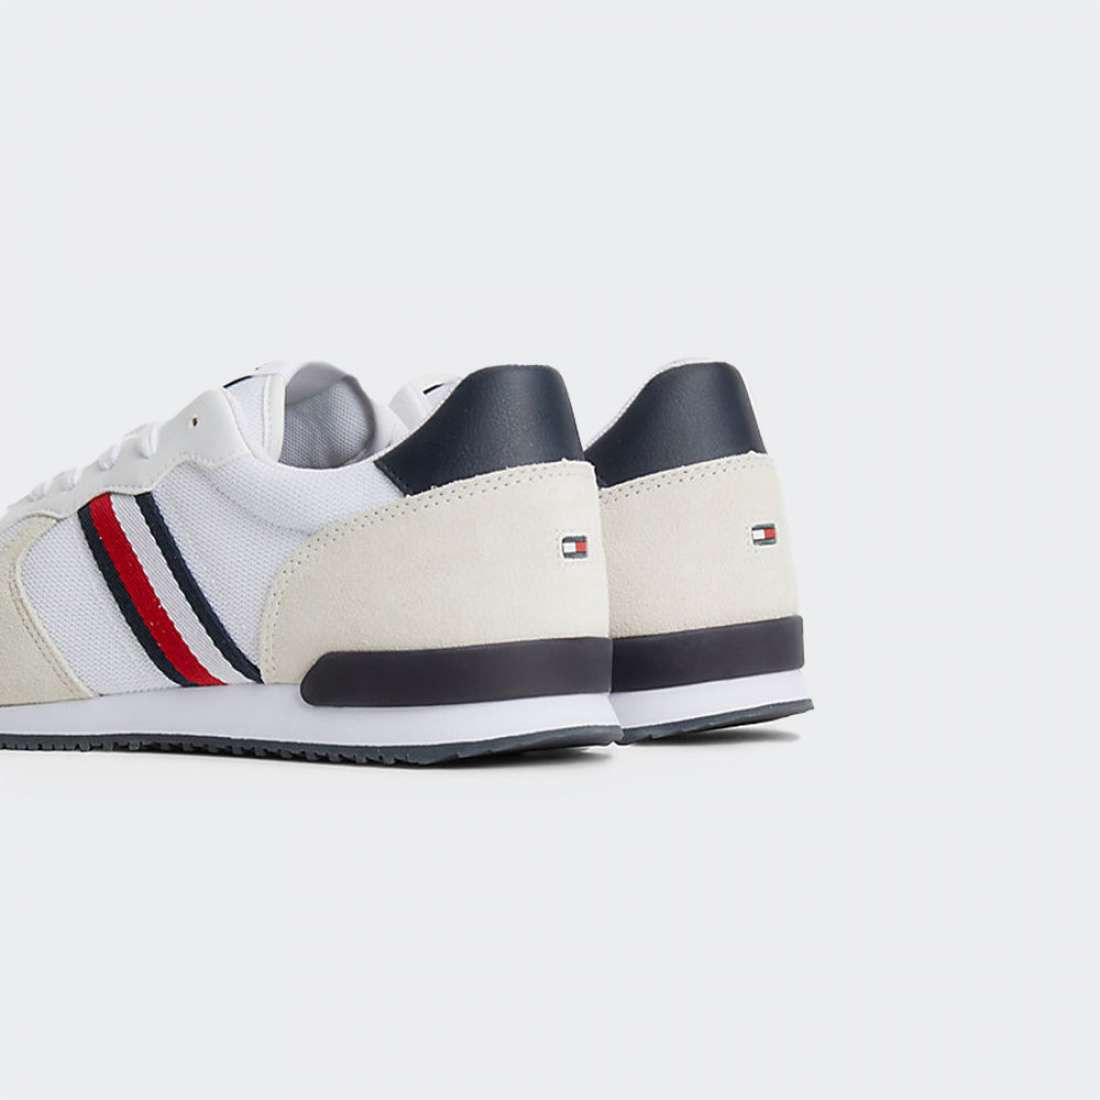 TOMMY HILFIGER ICONIC RUNNER WHITE